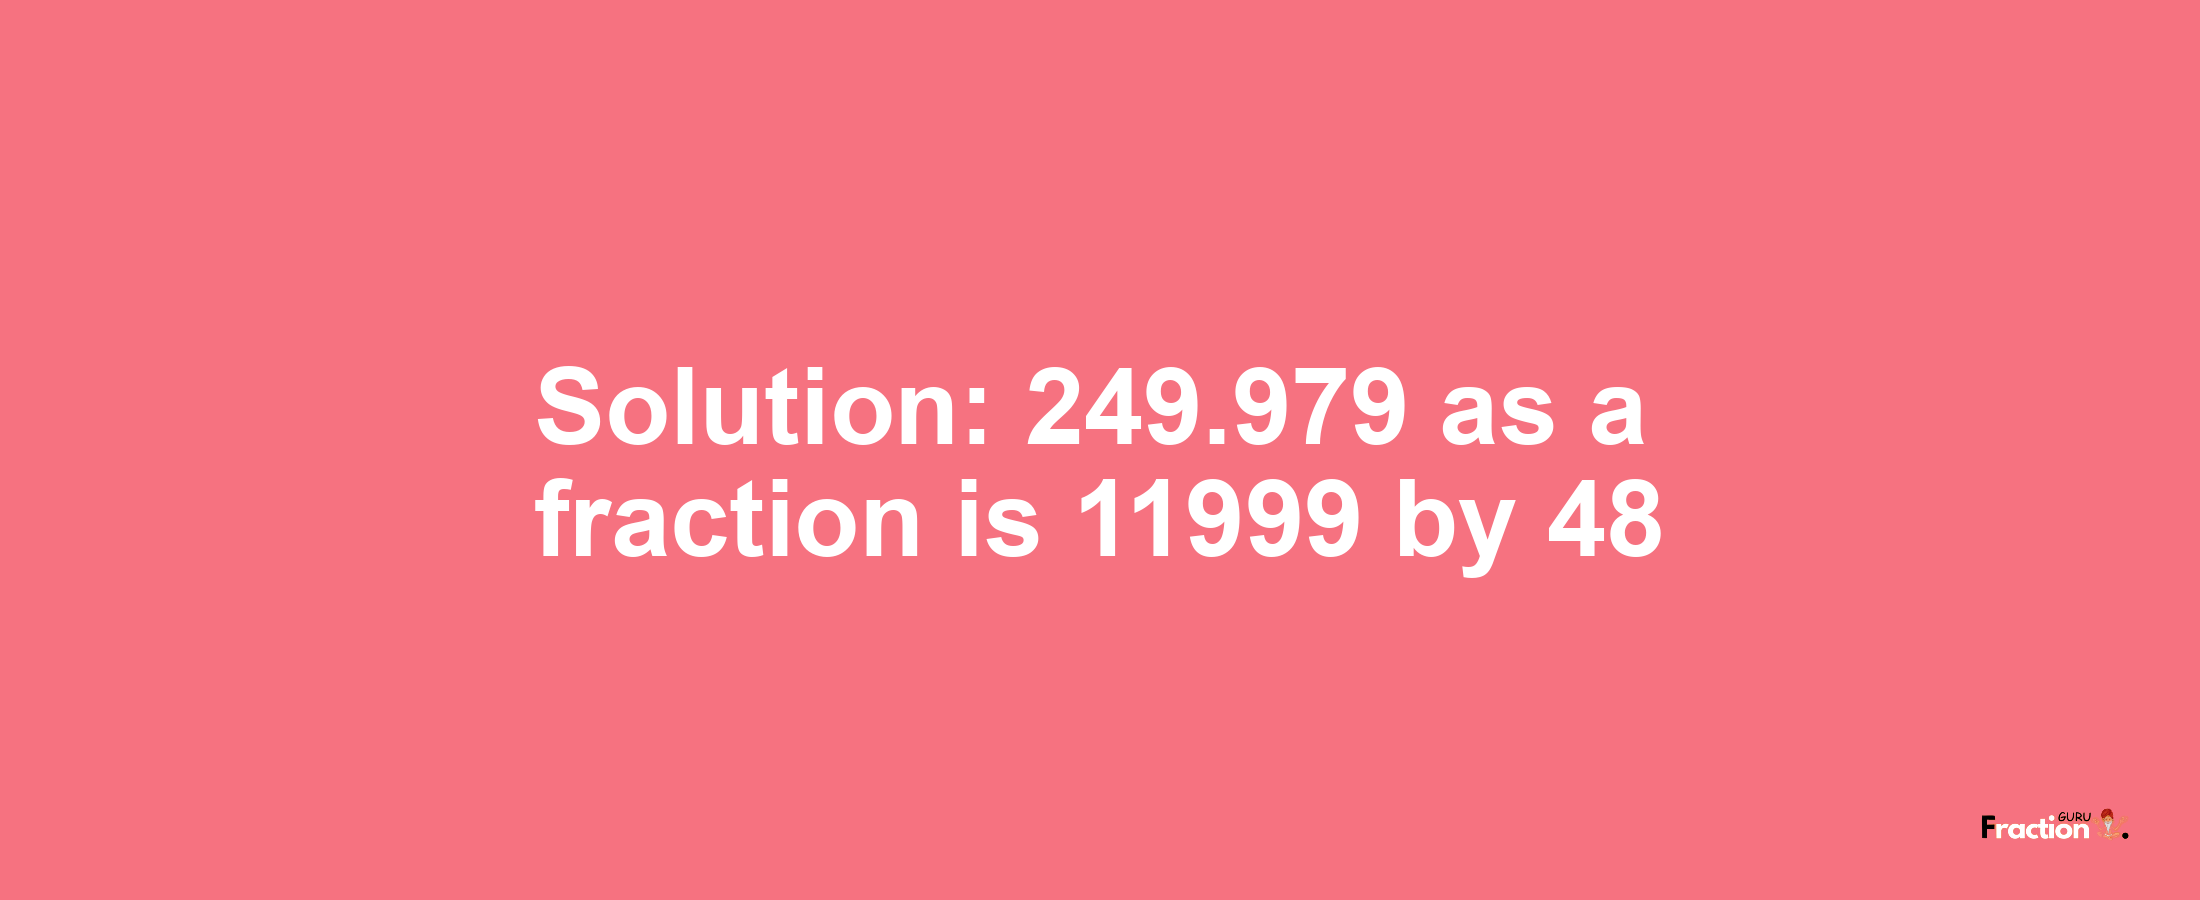 Solution:249.979 as a fraction is 11999/48